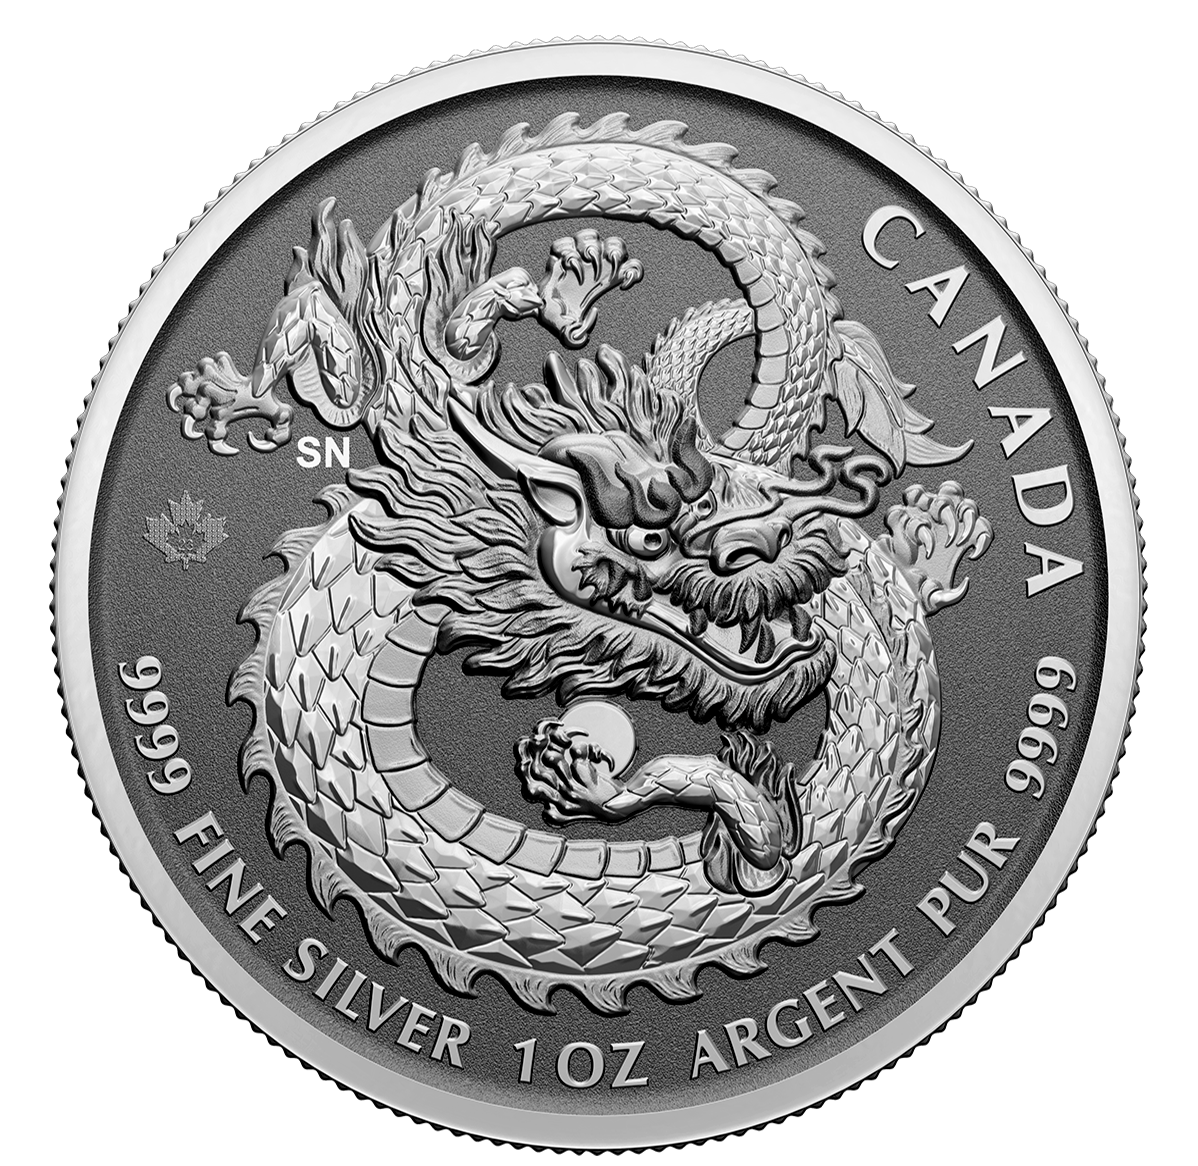 https://www.mint.ca/globalassets/products/bullion/2023/l9/244062-2023-1oz-9999-pure-silver-coin-dragon-high-relief-bullion/244062_rev-1198.png?hash=638260505960000000